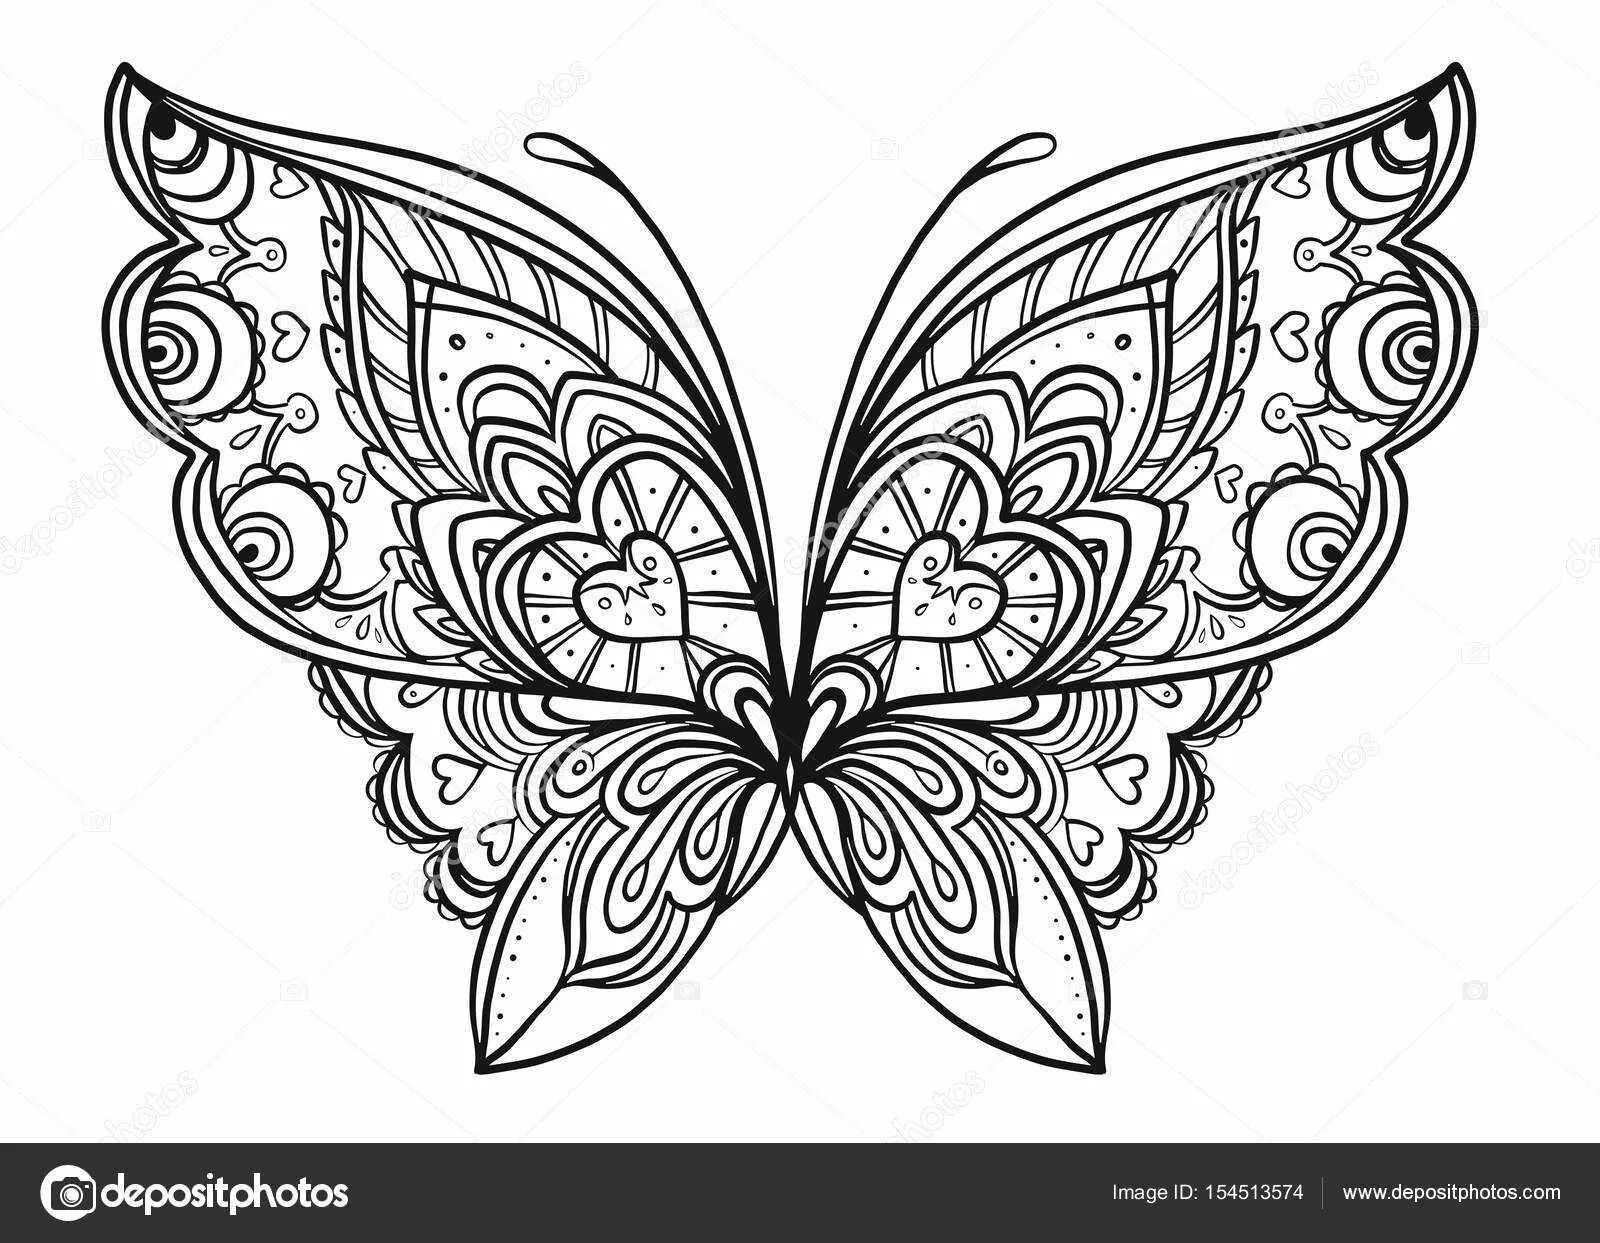 Intricate coloring of butterflies complex